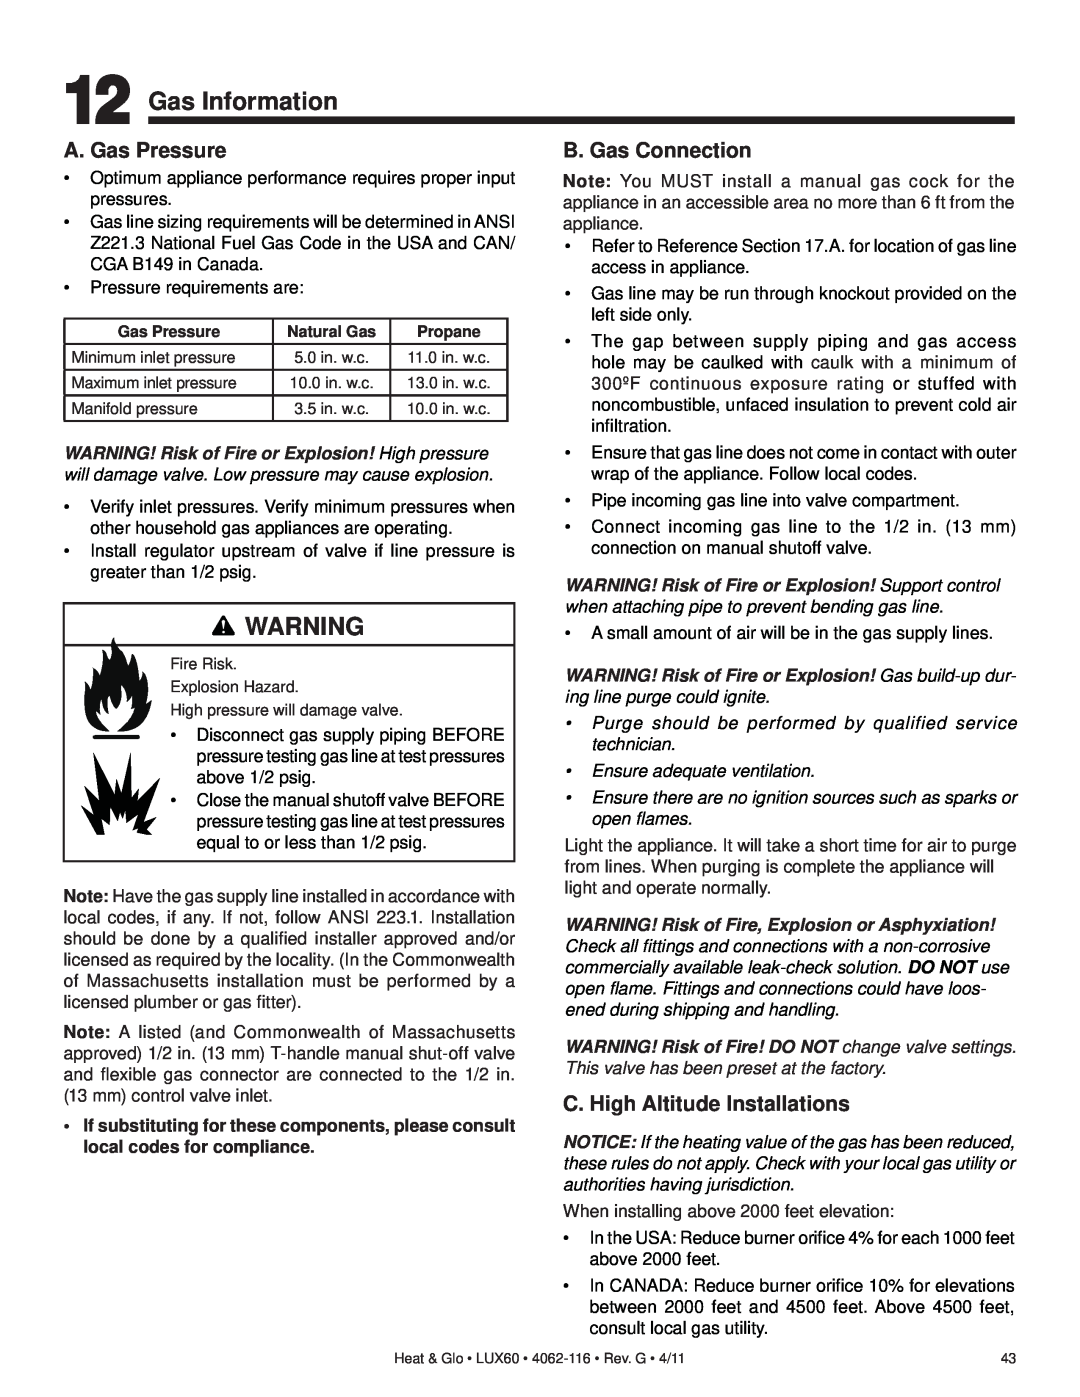 Heat & Glo LifeStyle LUX60 owner manual Gas Information, A. Gas Pressure, B. Gas Connection, C. High Altitude Installations 